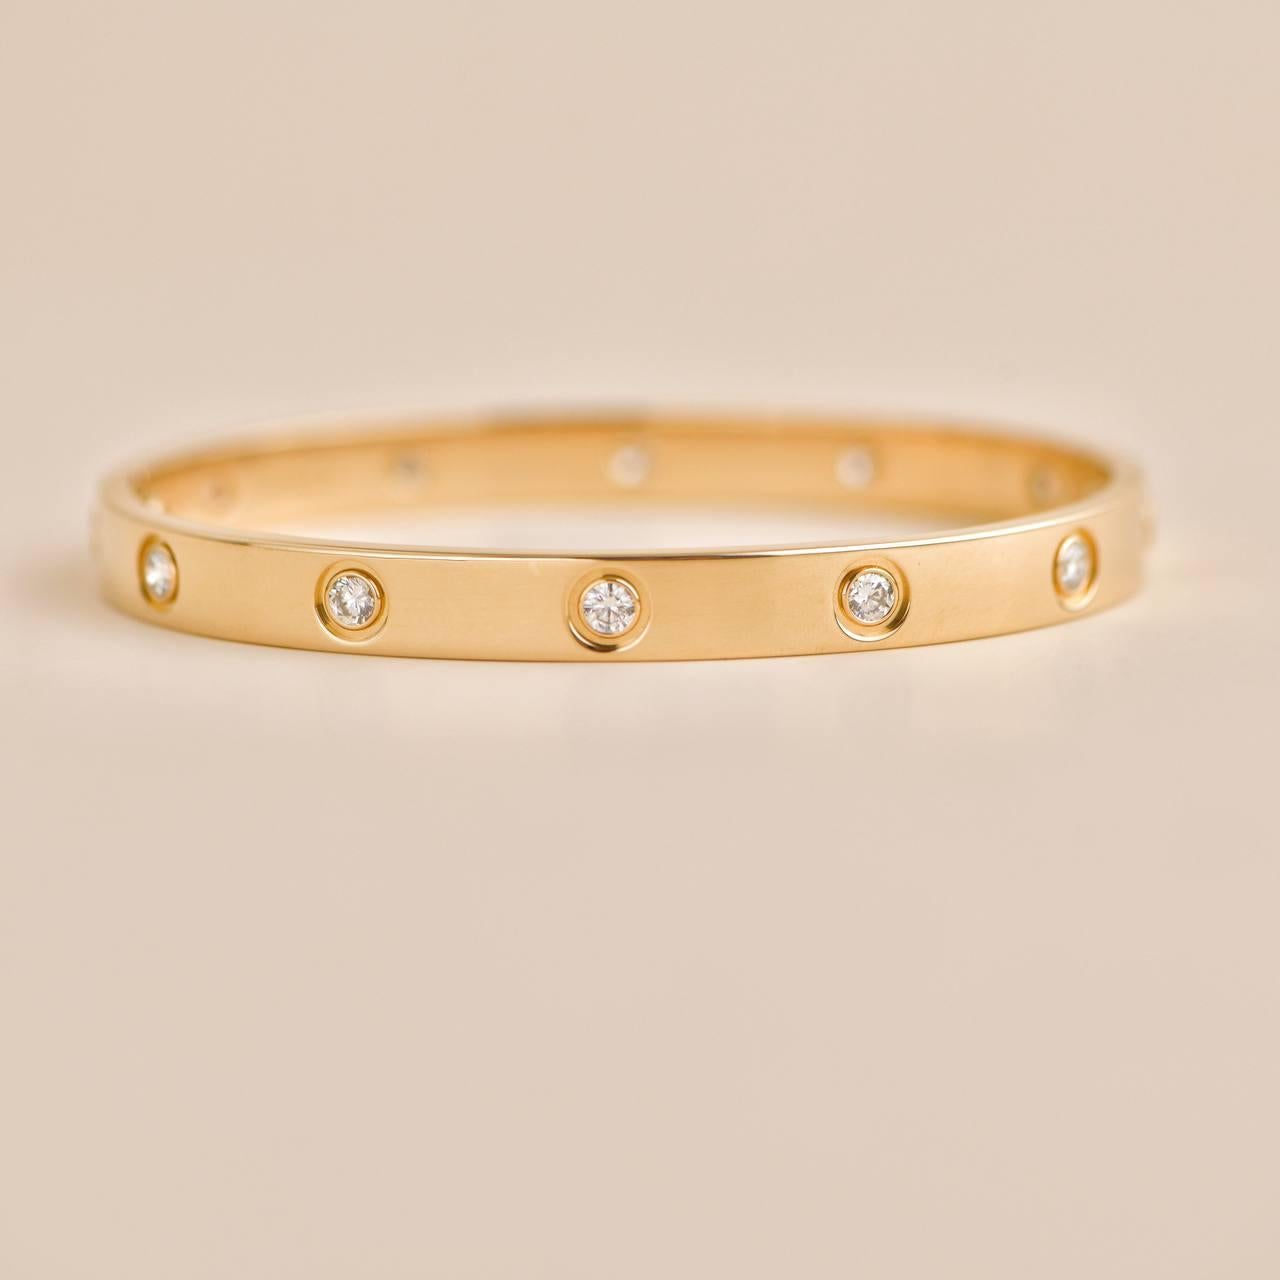 Cartier Love Bracelet 10 Diamond Yellow Gold Size 17 In Excellent Condition For Sale In Banbury, GB